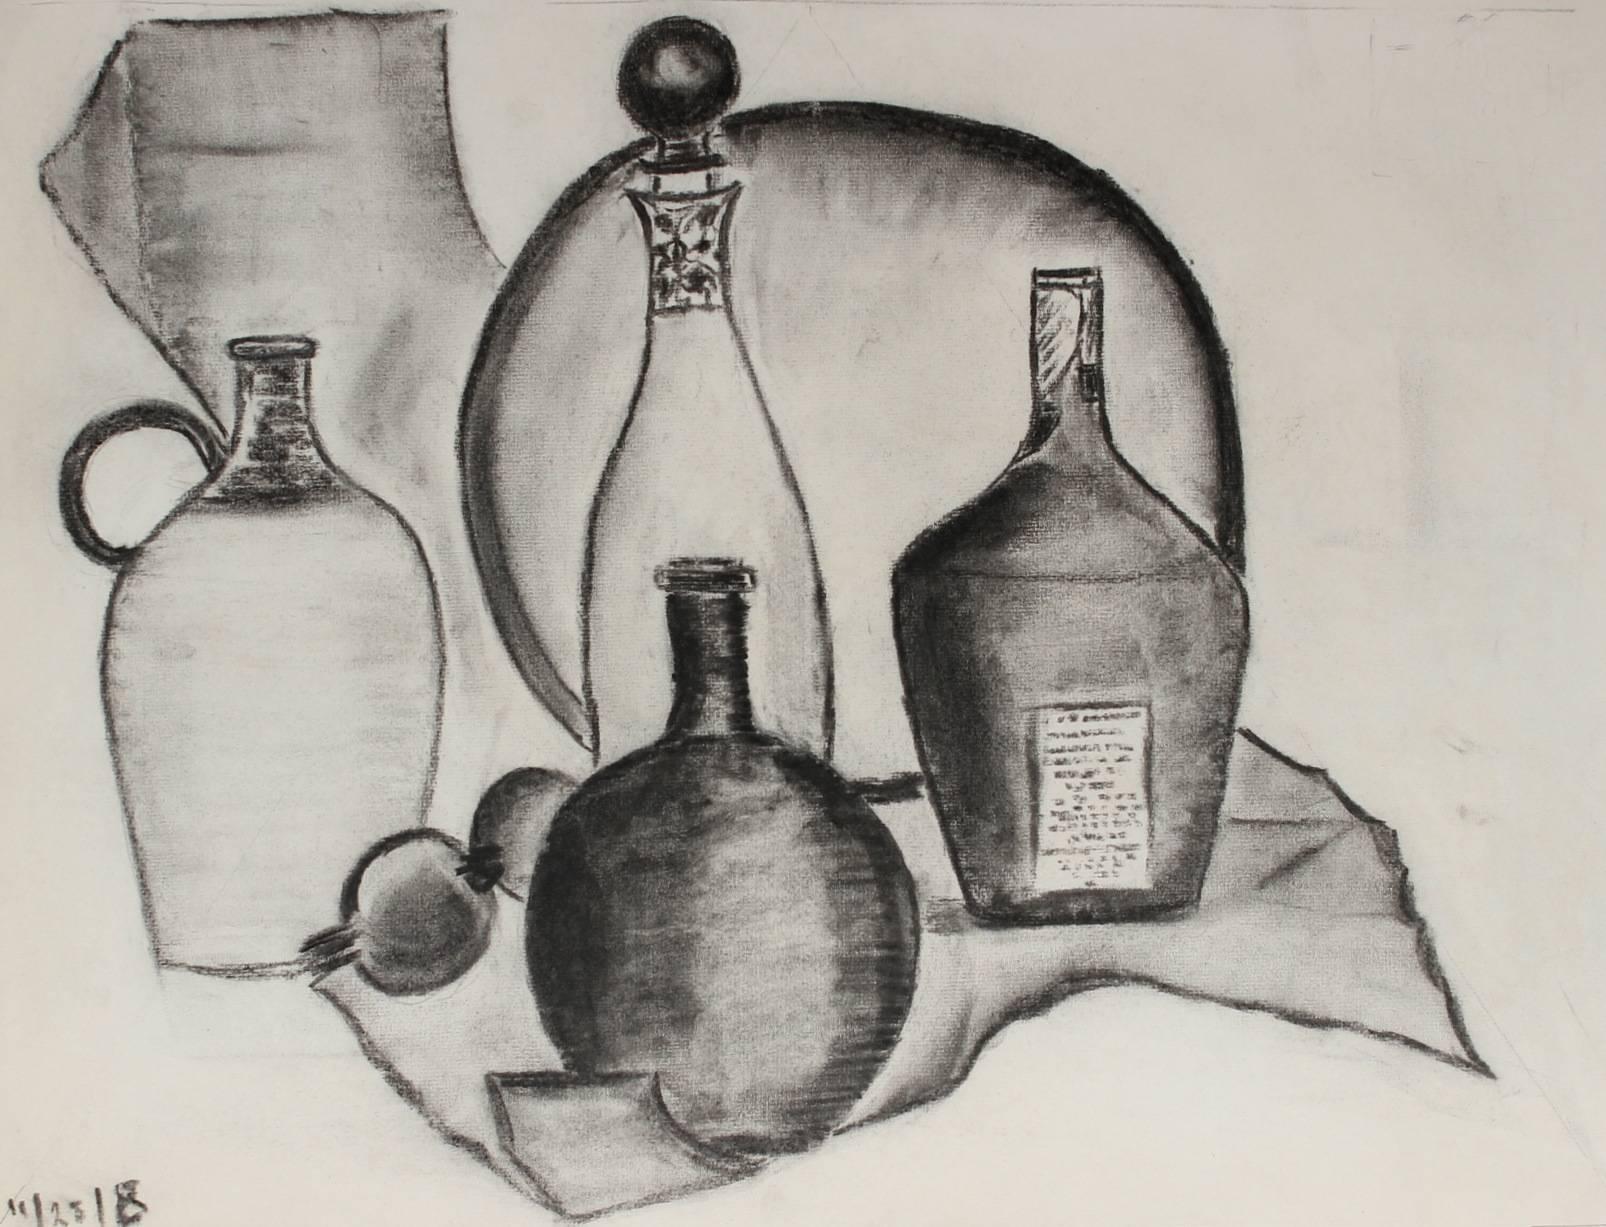 Unknown Still-Life - Modernist Still Life with Bottles, Charcoal Drawing